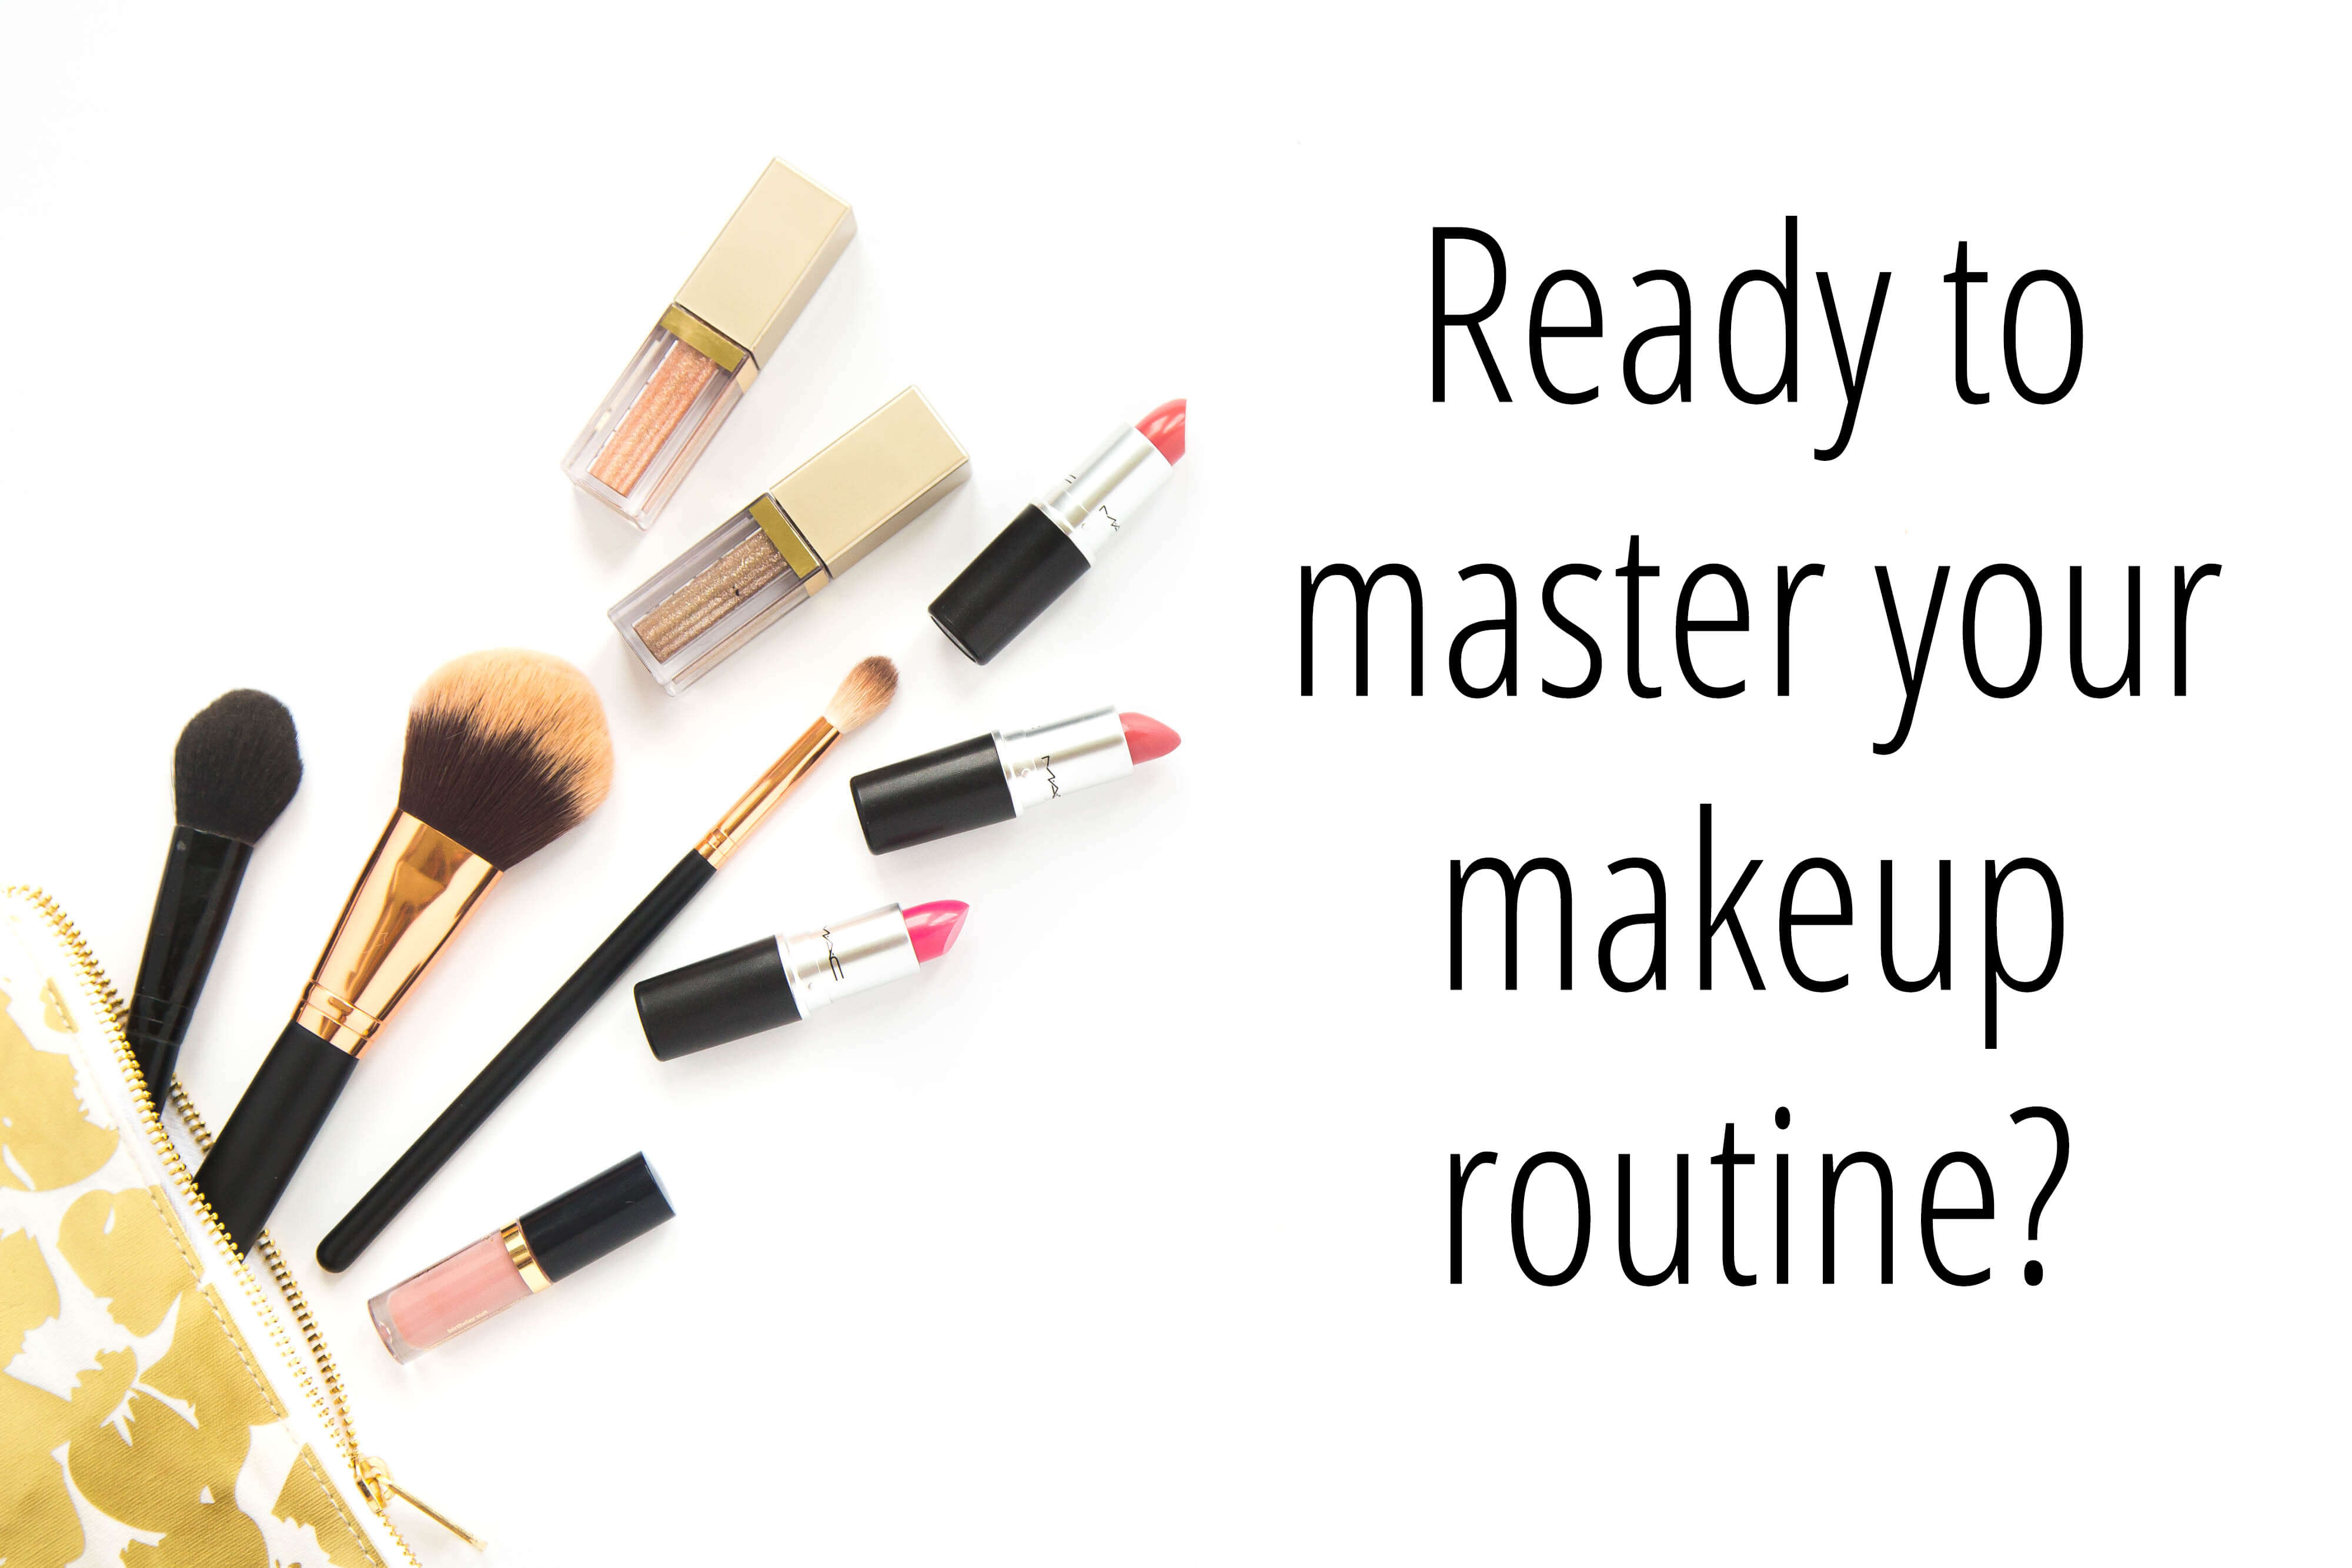 Ready to master your makeup routine?